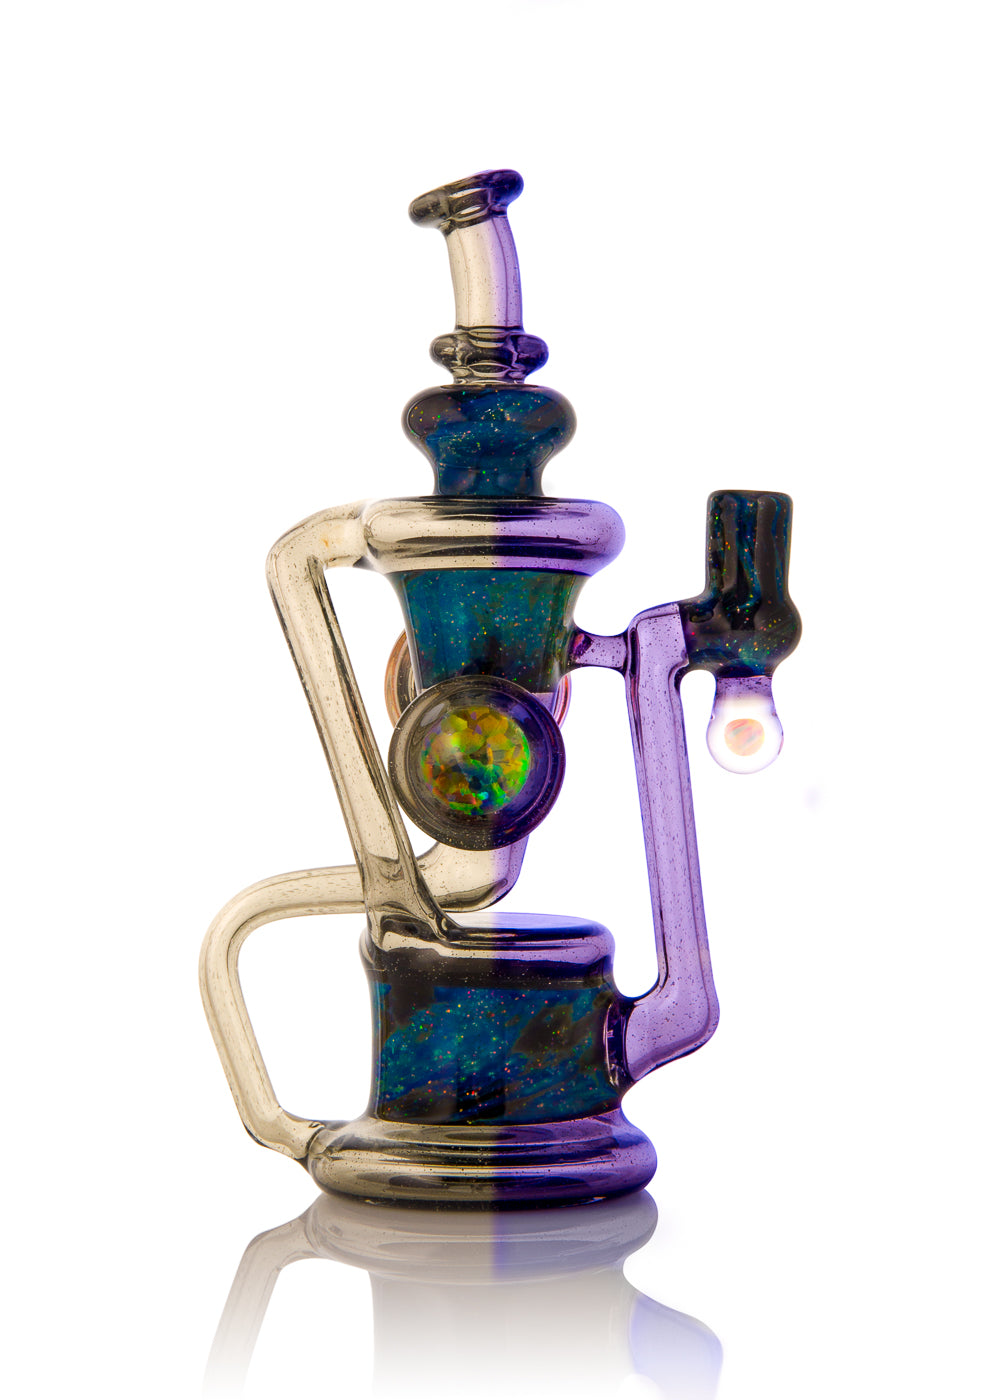 Z Cycler #8 in Blue Medusa CFL and Crushed Opal with Signed Pelican Recycler by Big Z